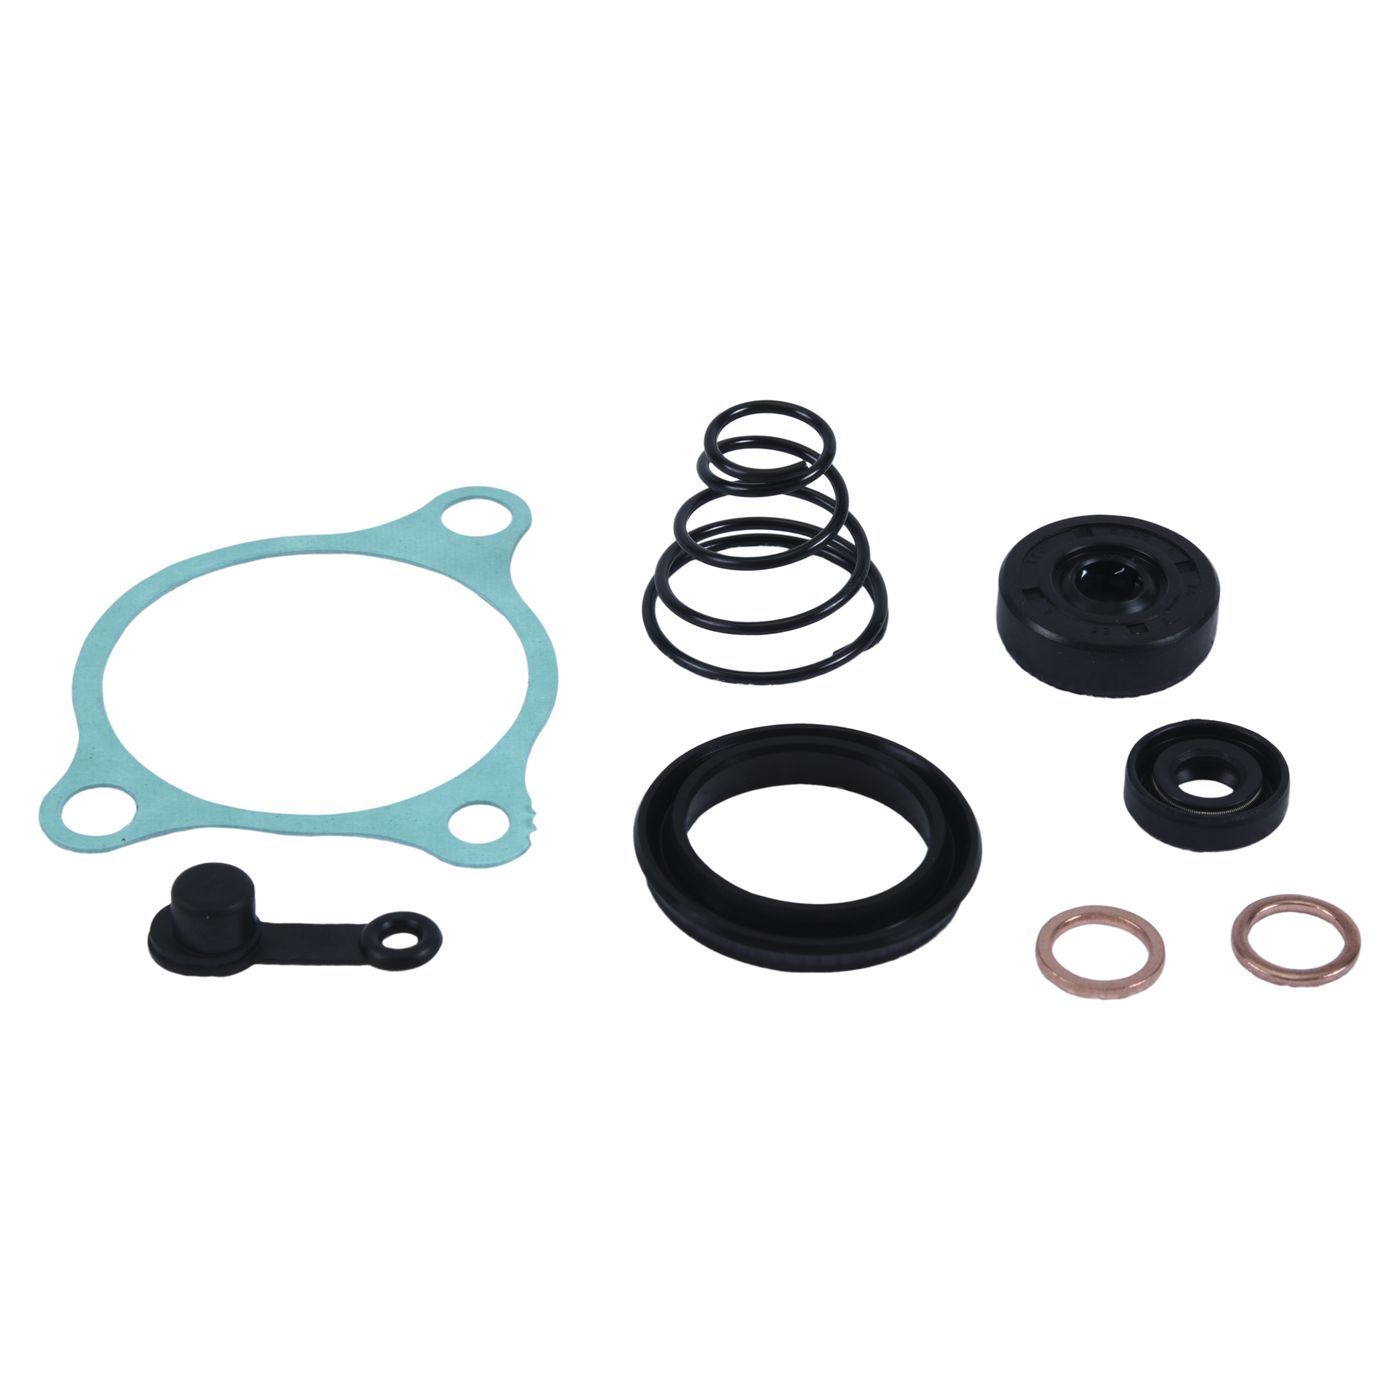 Wrp Clutch Slave Cylinder Kits - WRP186031 image